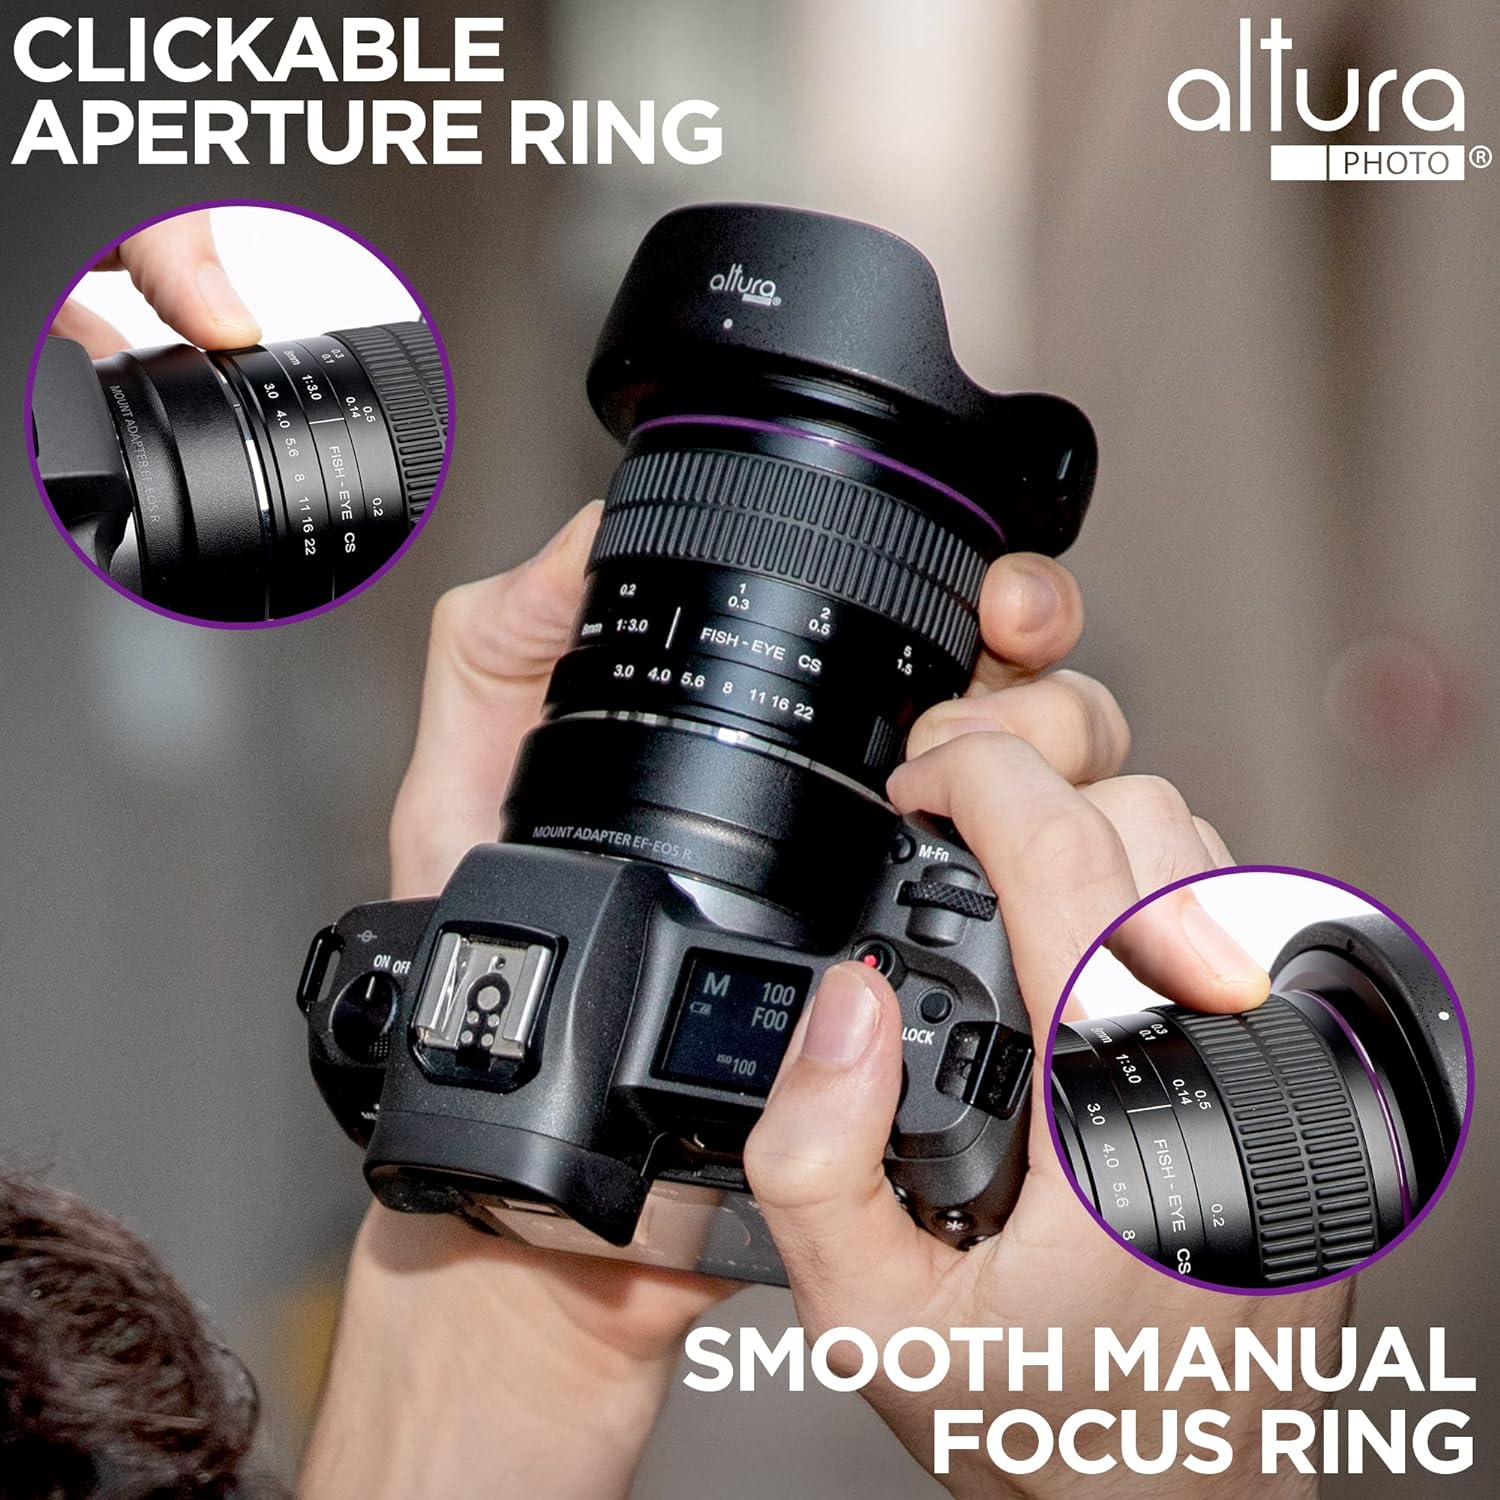 Altura Photo 8MM f/3.0 Fisheye Lens for Nikon DSLR AP-8MN Professional Ultra Wide Angle Aspherical Fixed Lens with Removeable Lens Hood and Protective Carry Case